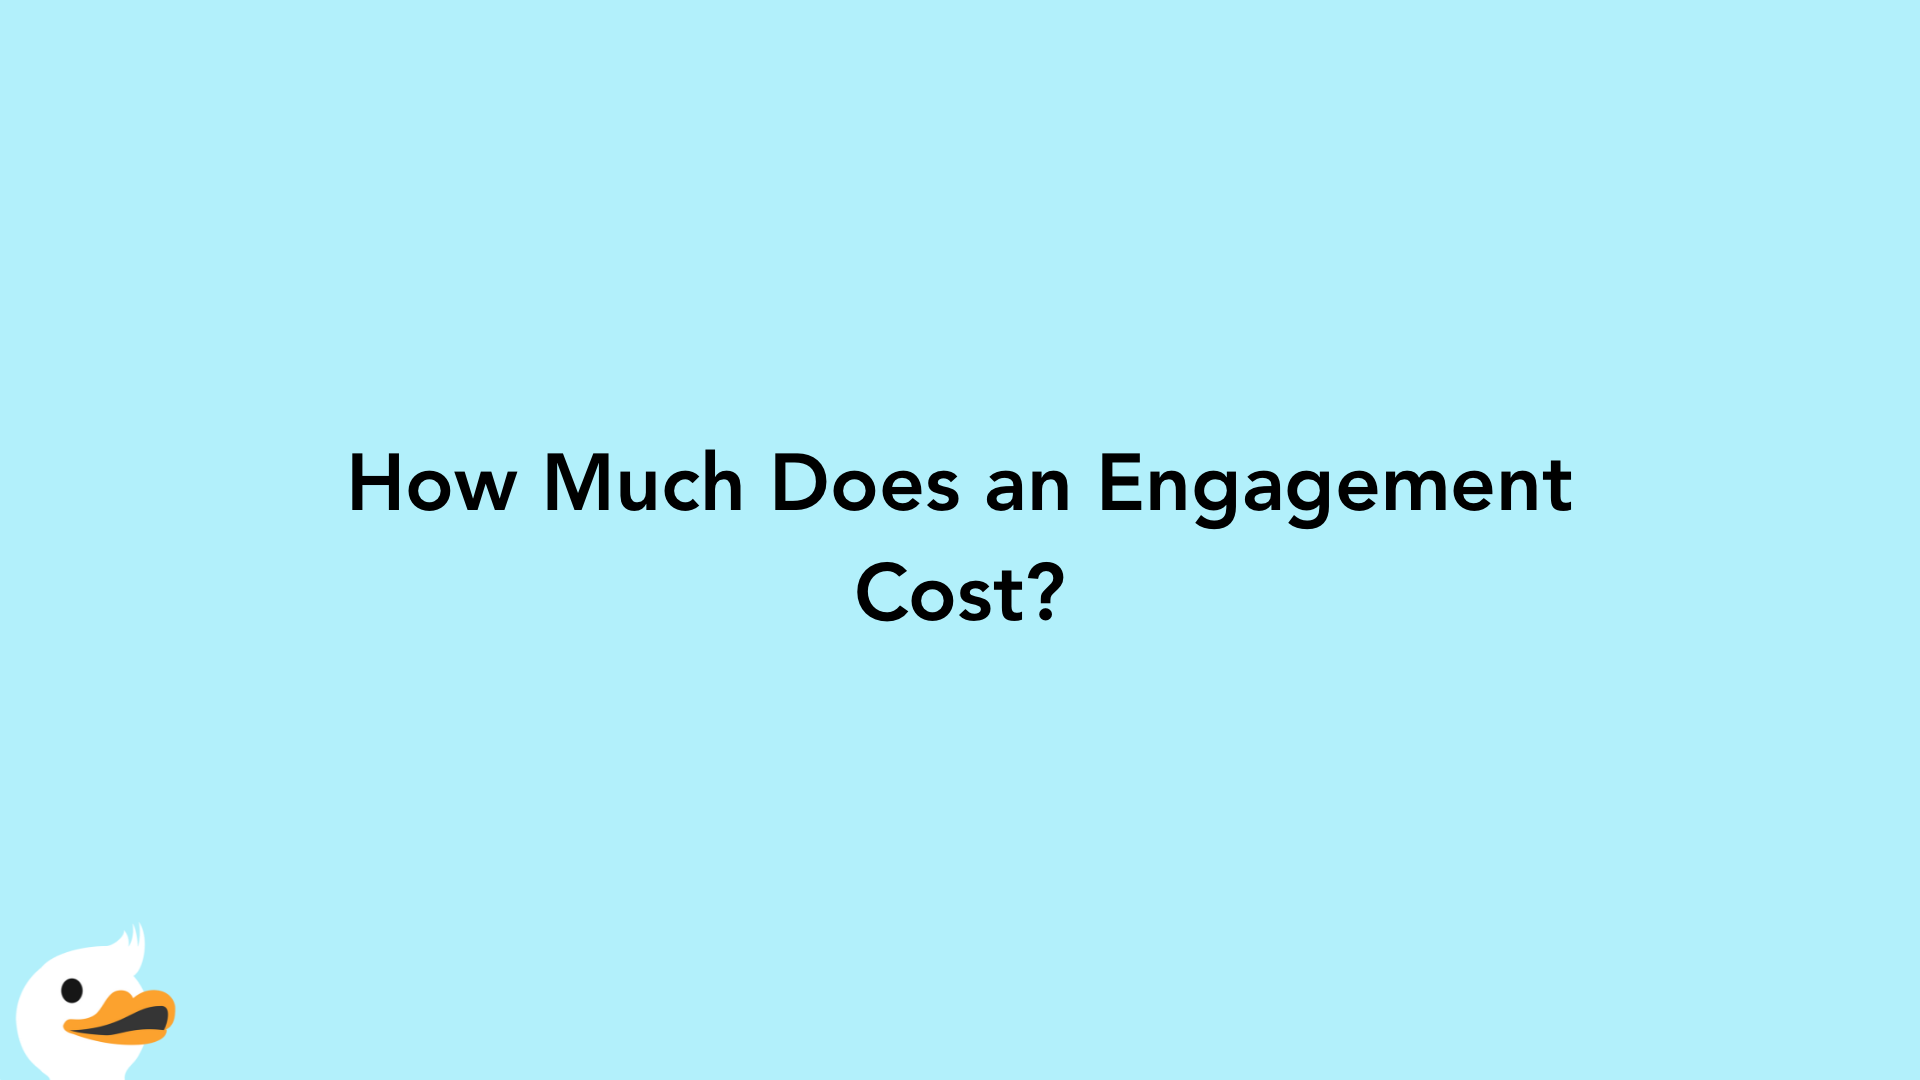 How Much Does an Engagement Cost?